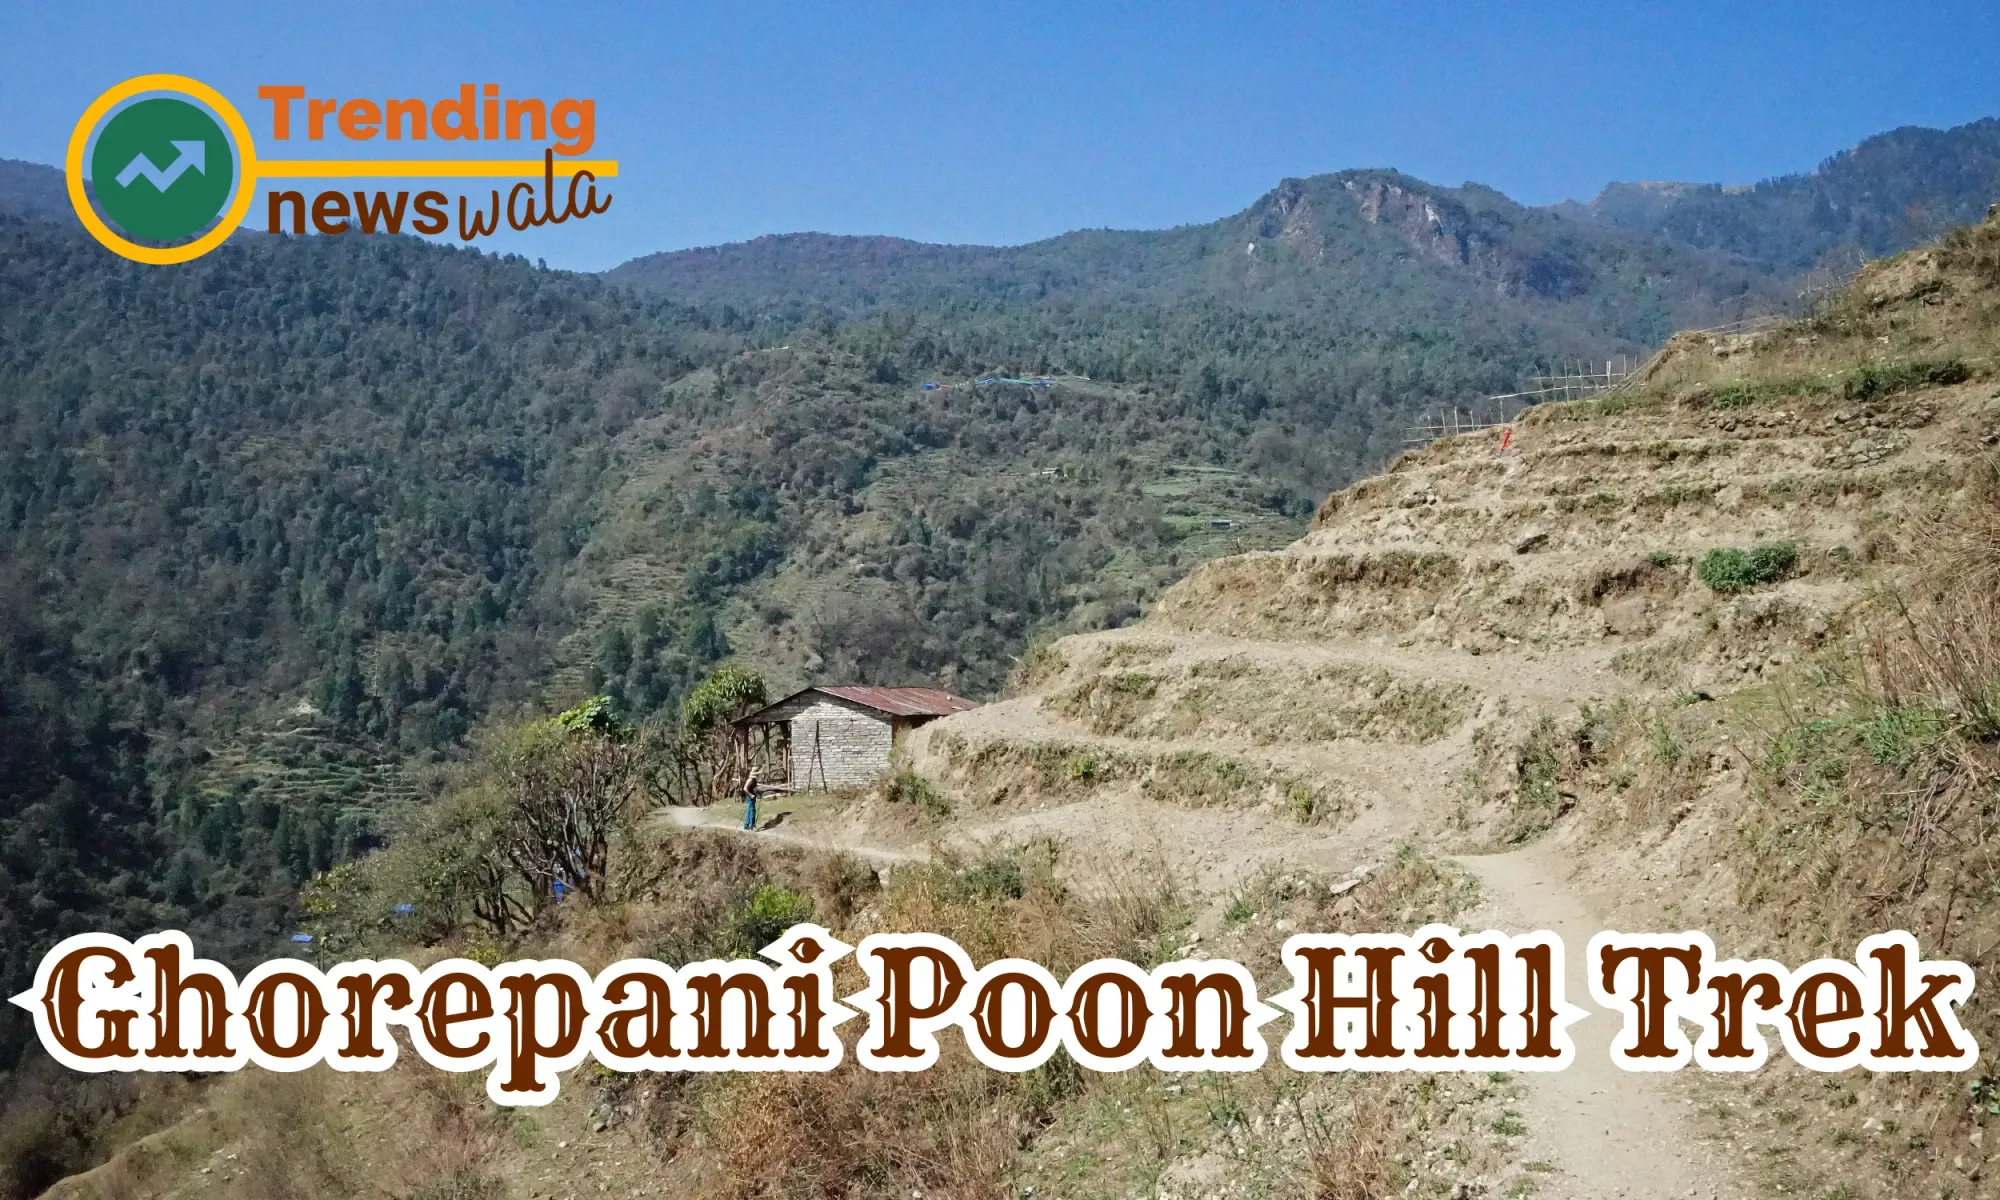 The Ghorepani Poon Hill Trek is a popular and relatively short trek in the Annapurna region of Nepal